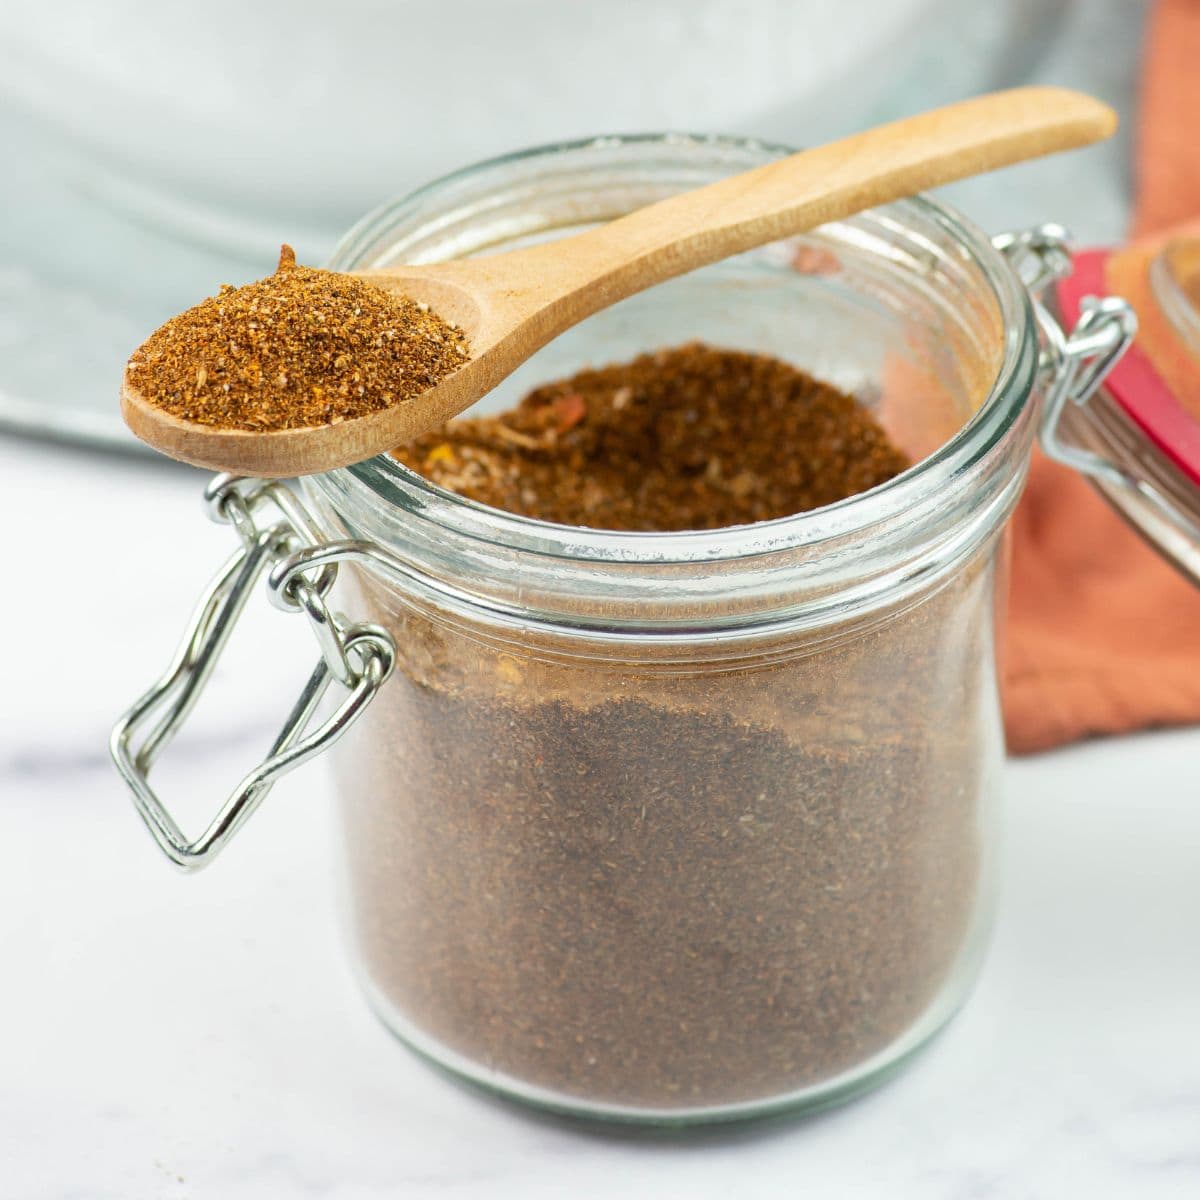 Gourmet Taco Seasoning in a glass jar with a scoop full on a wooden spoon.